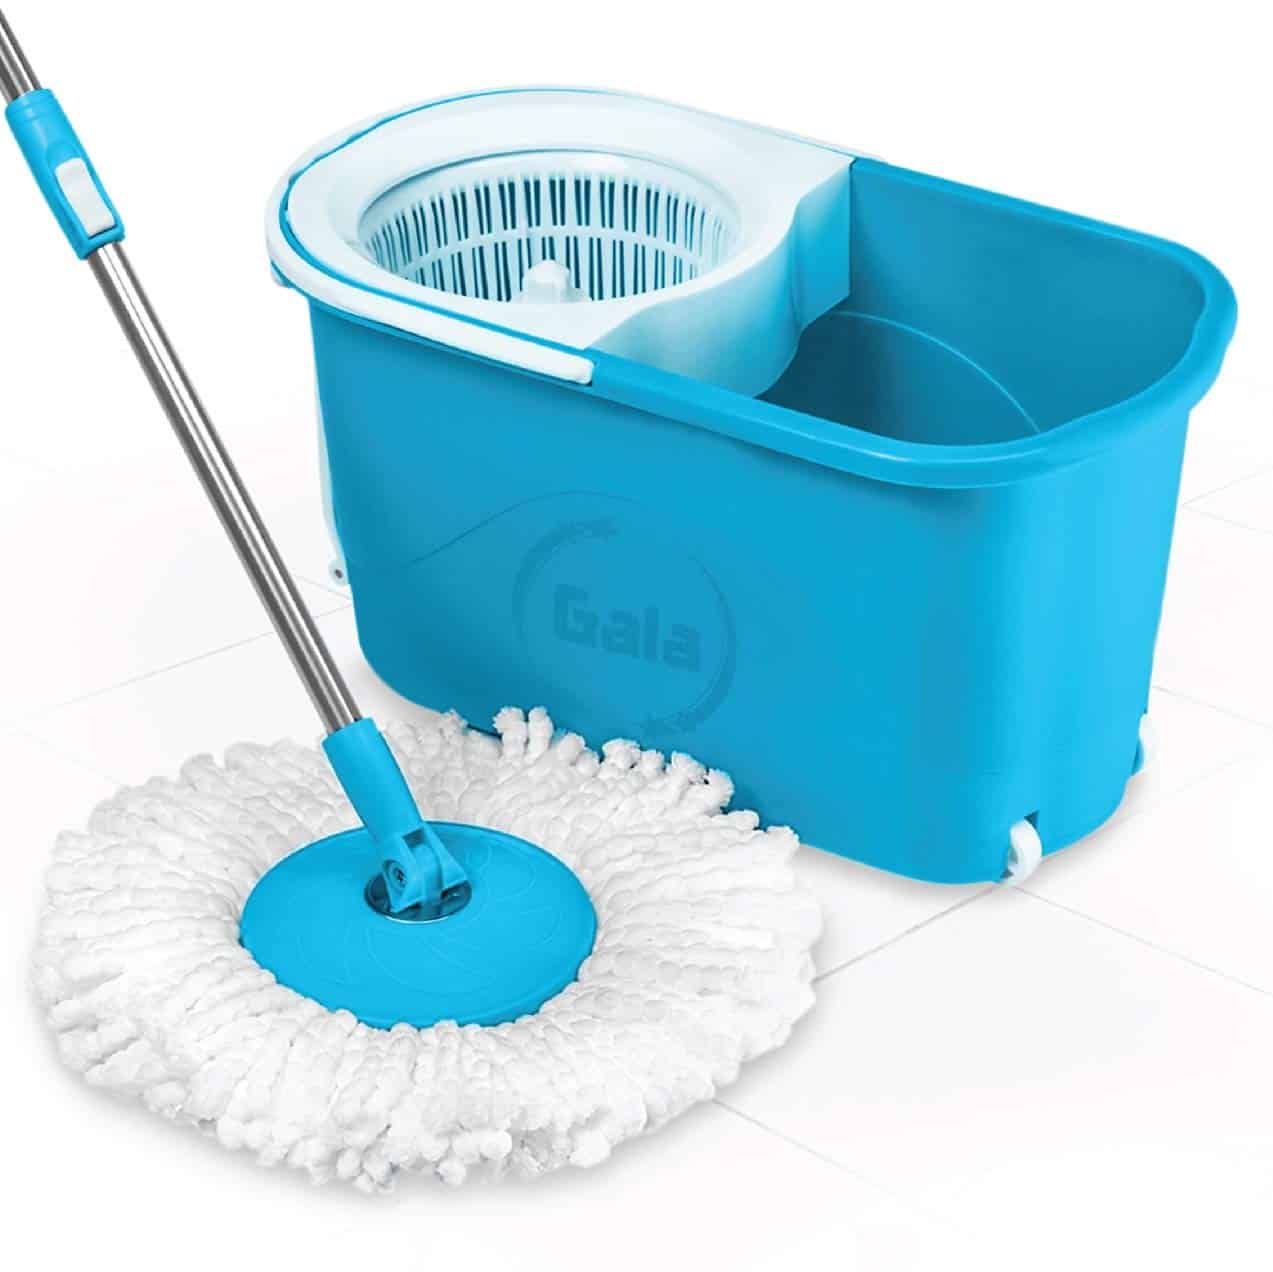 Best Gala Spin Mop in India 2021 (Very Useful Product for Deep Cleaning) UP to 40% OFF on Amazon 2